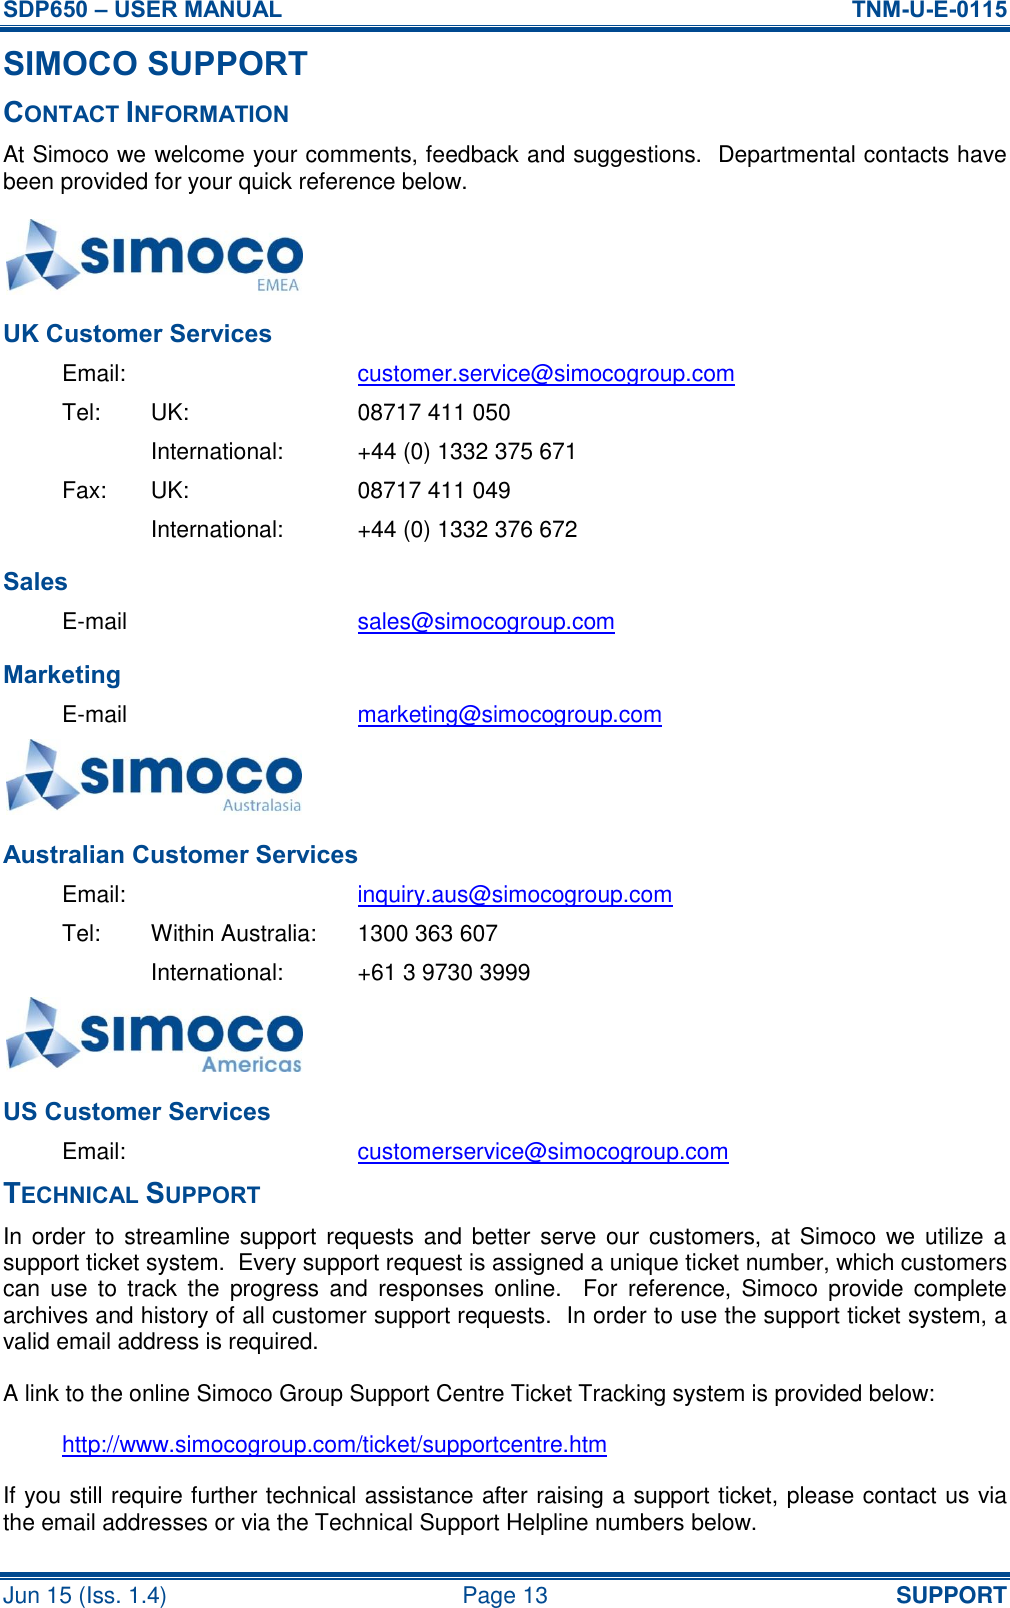 SDP650 – USER MANUAL  TNM-U-E-0115 Jun 15 (Iss. 1.4)  Page 13 SUPPORT SIMOCO SUPPORT CONTACT INFORMATION At Simoco we welcome your comments, feedback and suggestions.  Departmental contacts have been provided for your quick reference below.  UK Customer Services Email:  customer.service@simocogroup.com Tel:  UK:  08717 411 050   International:  +44 (0) 1332 375 671 Fax:  UK:  08717 411 049   International:  +44 (0) 1332 376 672 Sales E-mail  sales@simocogroup.com Marketing E-mail  marketing@simocogroup.com  Australian Customer Services Email:    inquiry.aus@simocogroup.com Tel:  Within Australia:  1300 363 607   International:  +61 3 9730 3999  US Customer Services Email:  customerservice@simocogroup.com TECHNICAL SUPPORT In order to  streamline support requests and better serve our  customers, at  Simoco  we  utilize a support ticket system.  Every support request is assigned a unique ticket number, which customers can  use  to  track  the  progress  and  responses online.    For  reference,  Simoco  provide  complete archives and history of all customer support requests.  In order to use the support ticket system, a valid email address is required. A link to the online Simoco Group Support Centre Ticket Tracking system is provided below: http://www.simocogroup.com/ticket/supportcentre.htm If you still require further technical assistance after raising a support ticket, please contact us via the email addresses or via the Technical Support Helpline numbers below. 